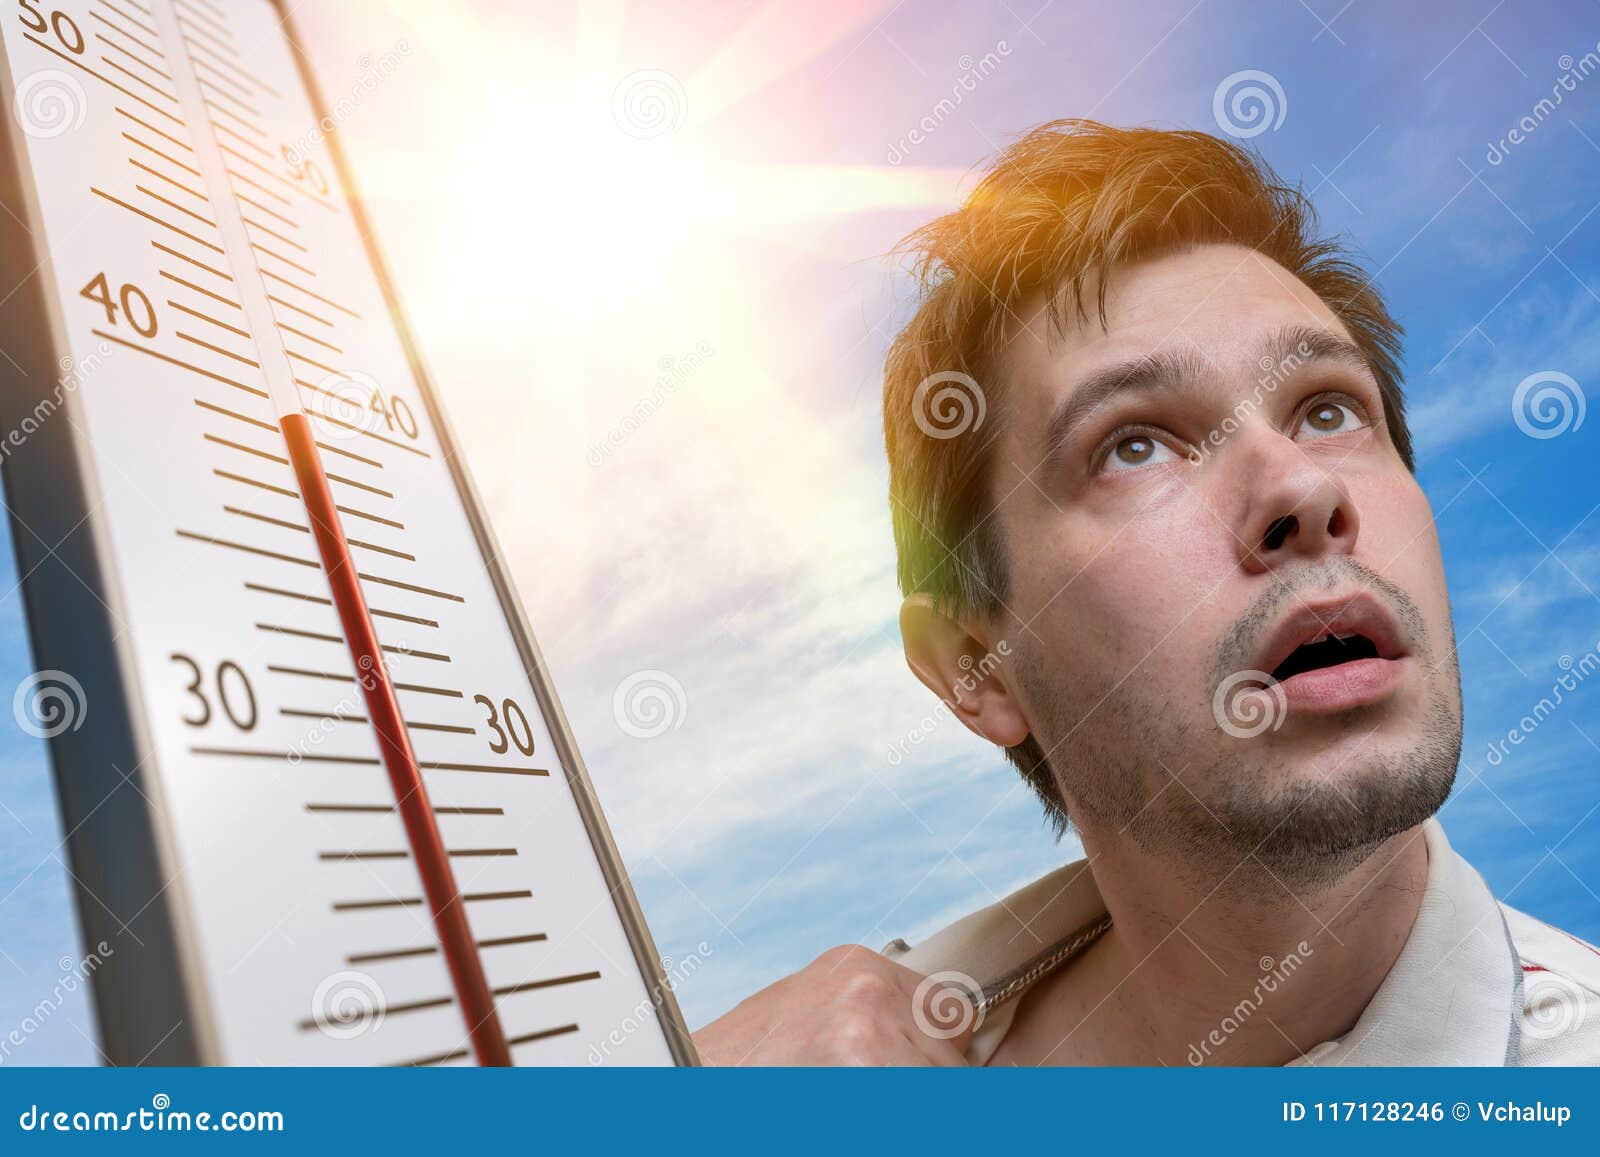 hot weather concept. young man is sweating. thermometer is showing high temperature. sun in background